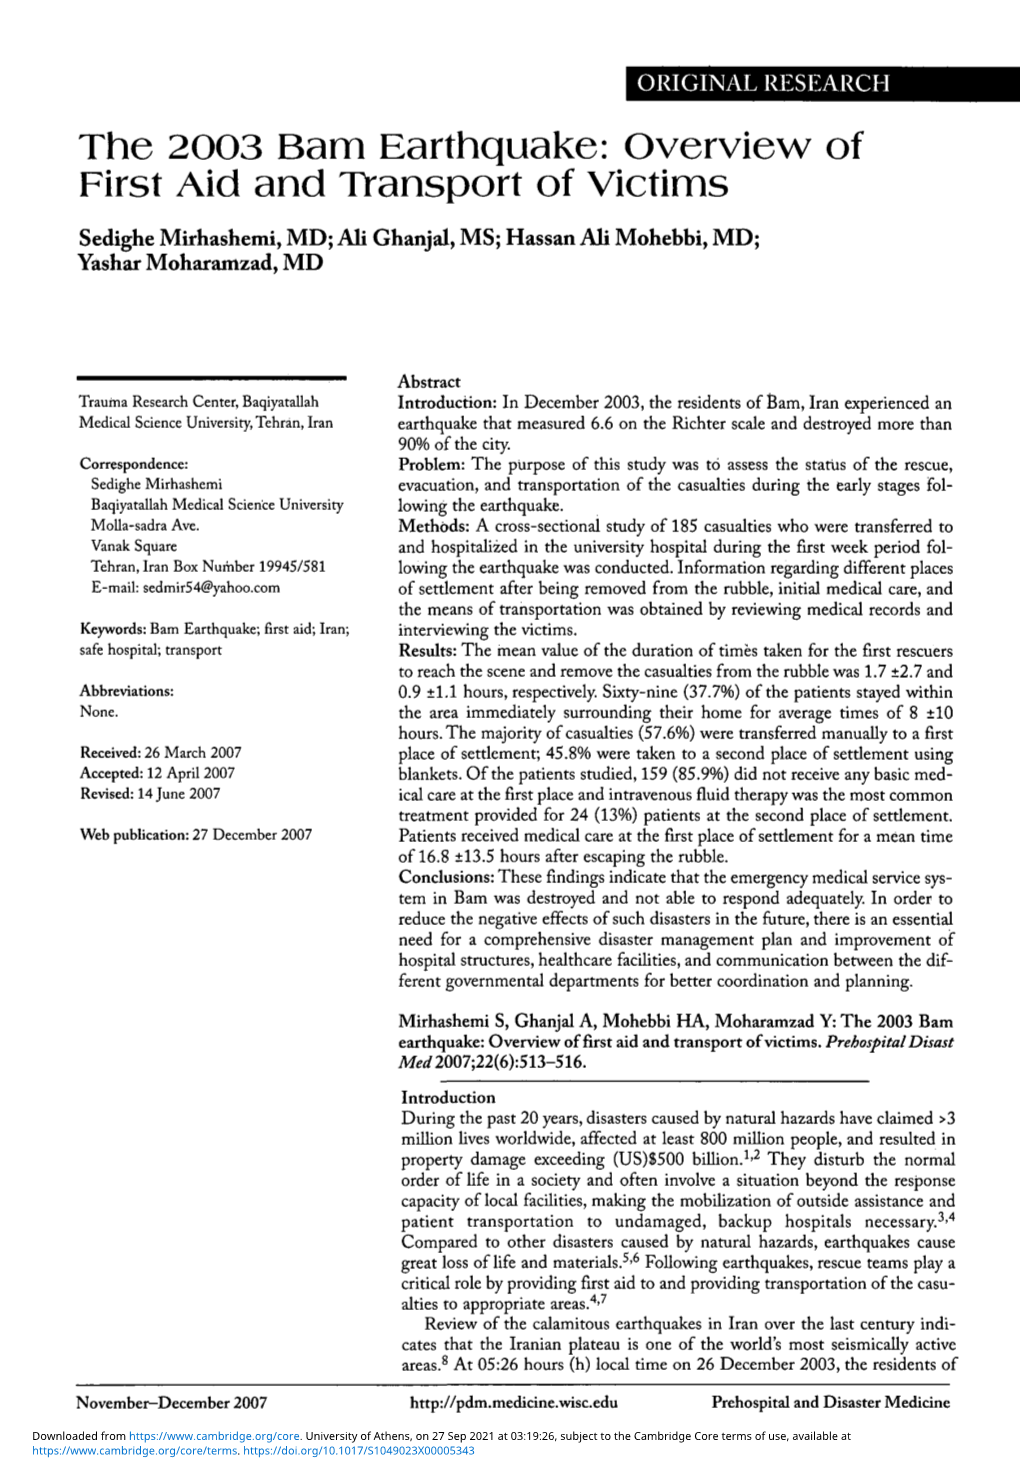 The 2003 Bam Earthquake: Overview of First Aid and Transport of Victims Sedighe Mirhashemi, MD; Ali Ghanjal, MS; Hassan Ali Mohebbi, MD; Yashar Moharamzad, MD